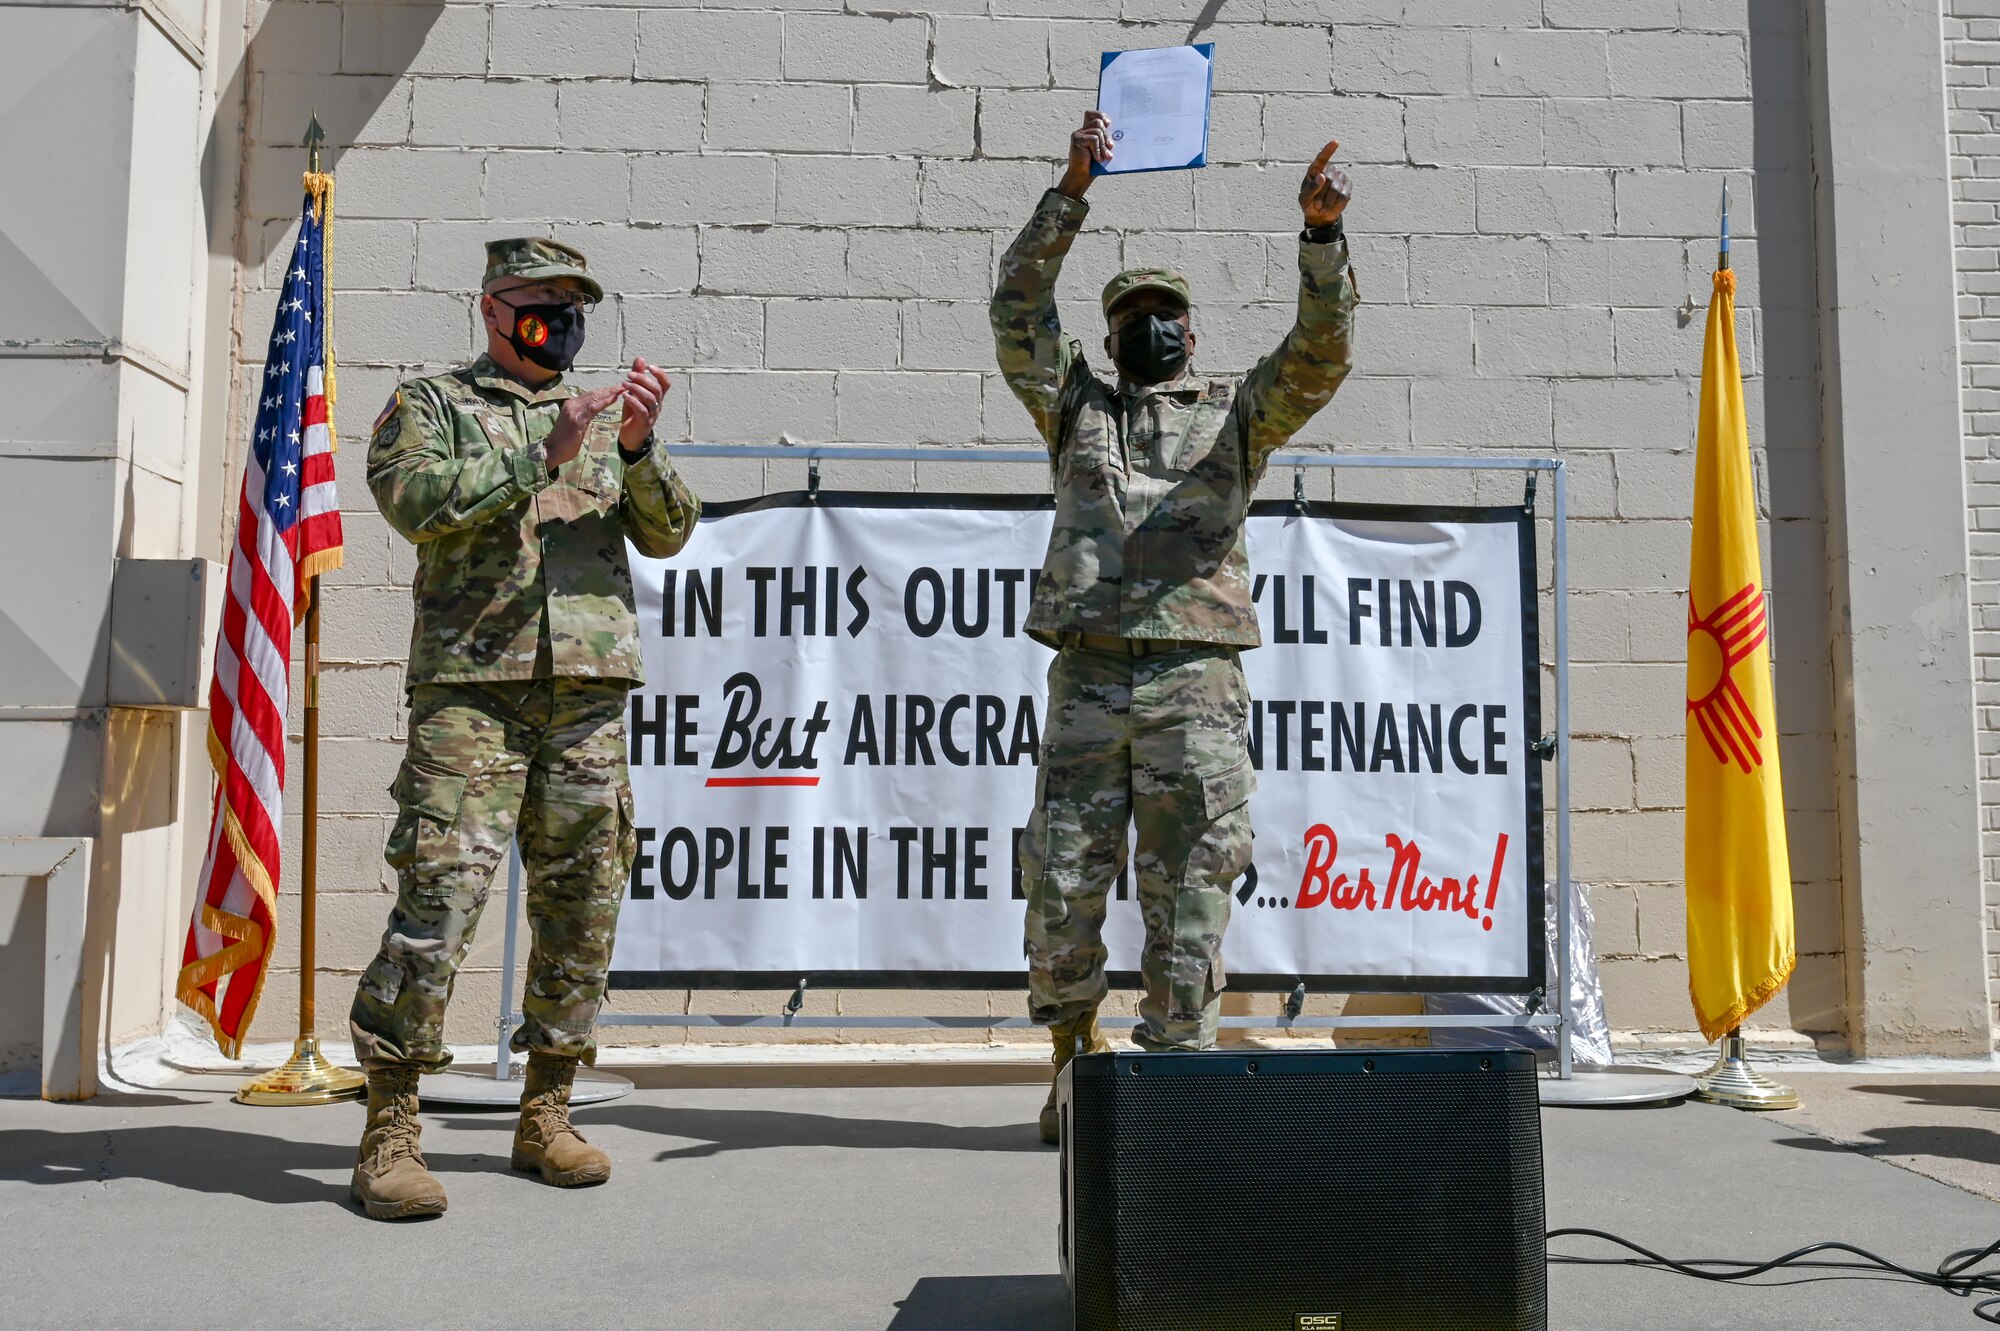 Gen. Nava and Col. Clark stand on a stage celebrating getting 2019 New Mexico State Outstanding Unit award, with a U.S. flag to the left and New Mexico state flag to the right